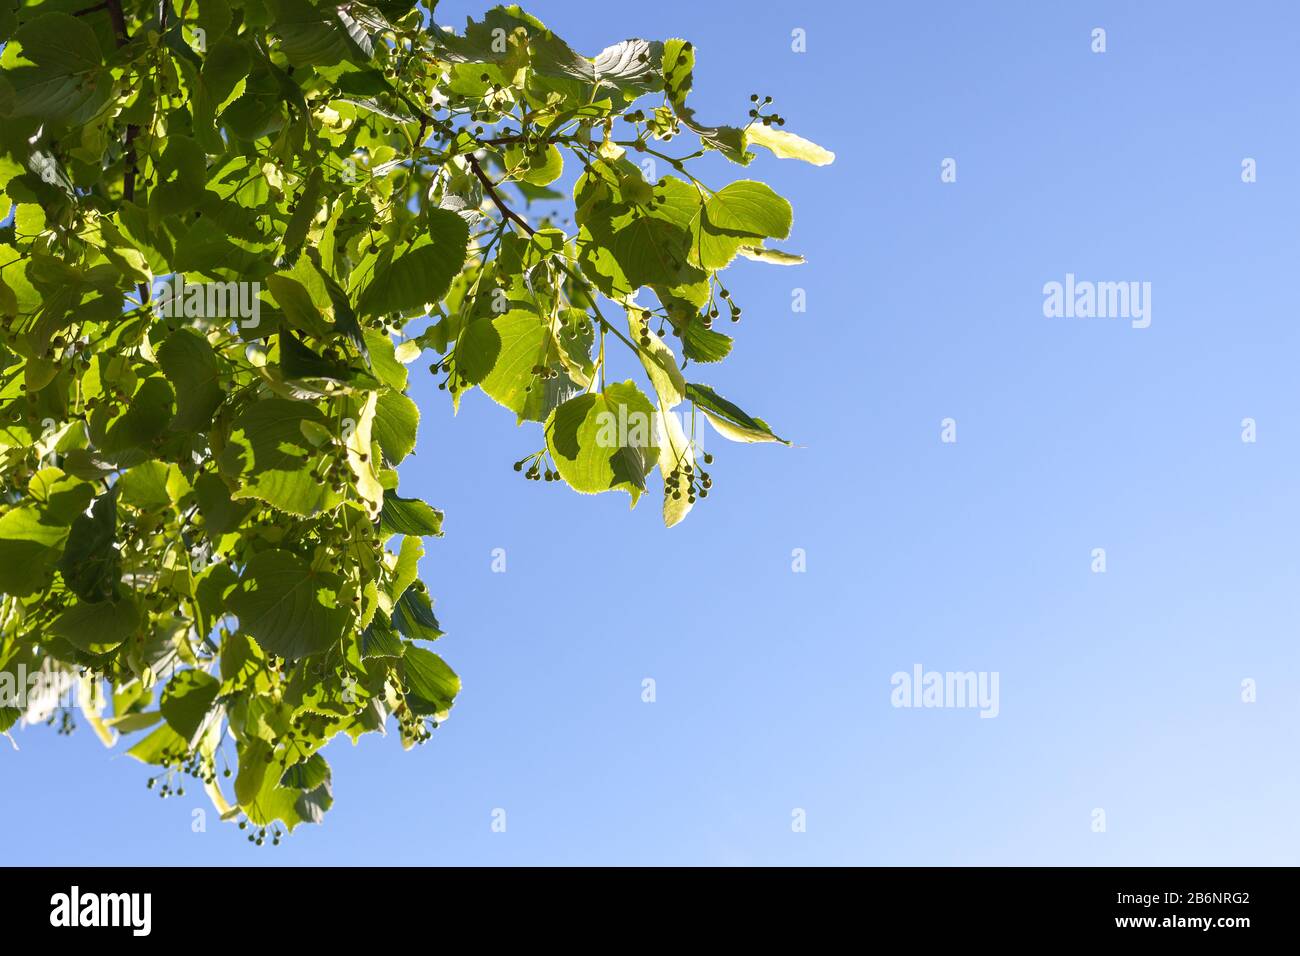 Linden blossom, green branch with green buds under blue sky at daytime, close up photo background with selective focus Stock Photo